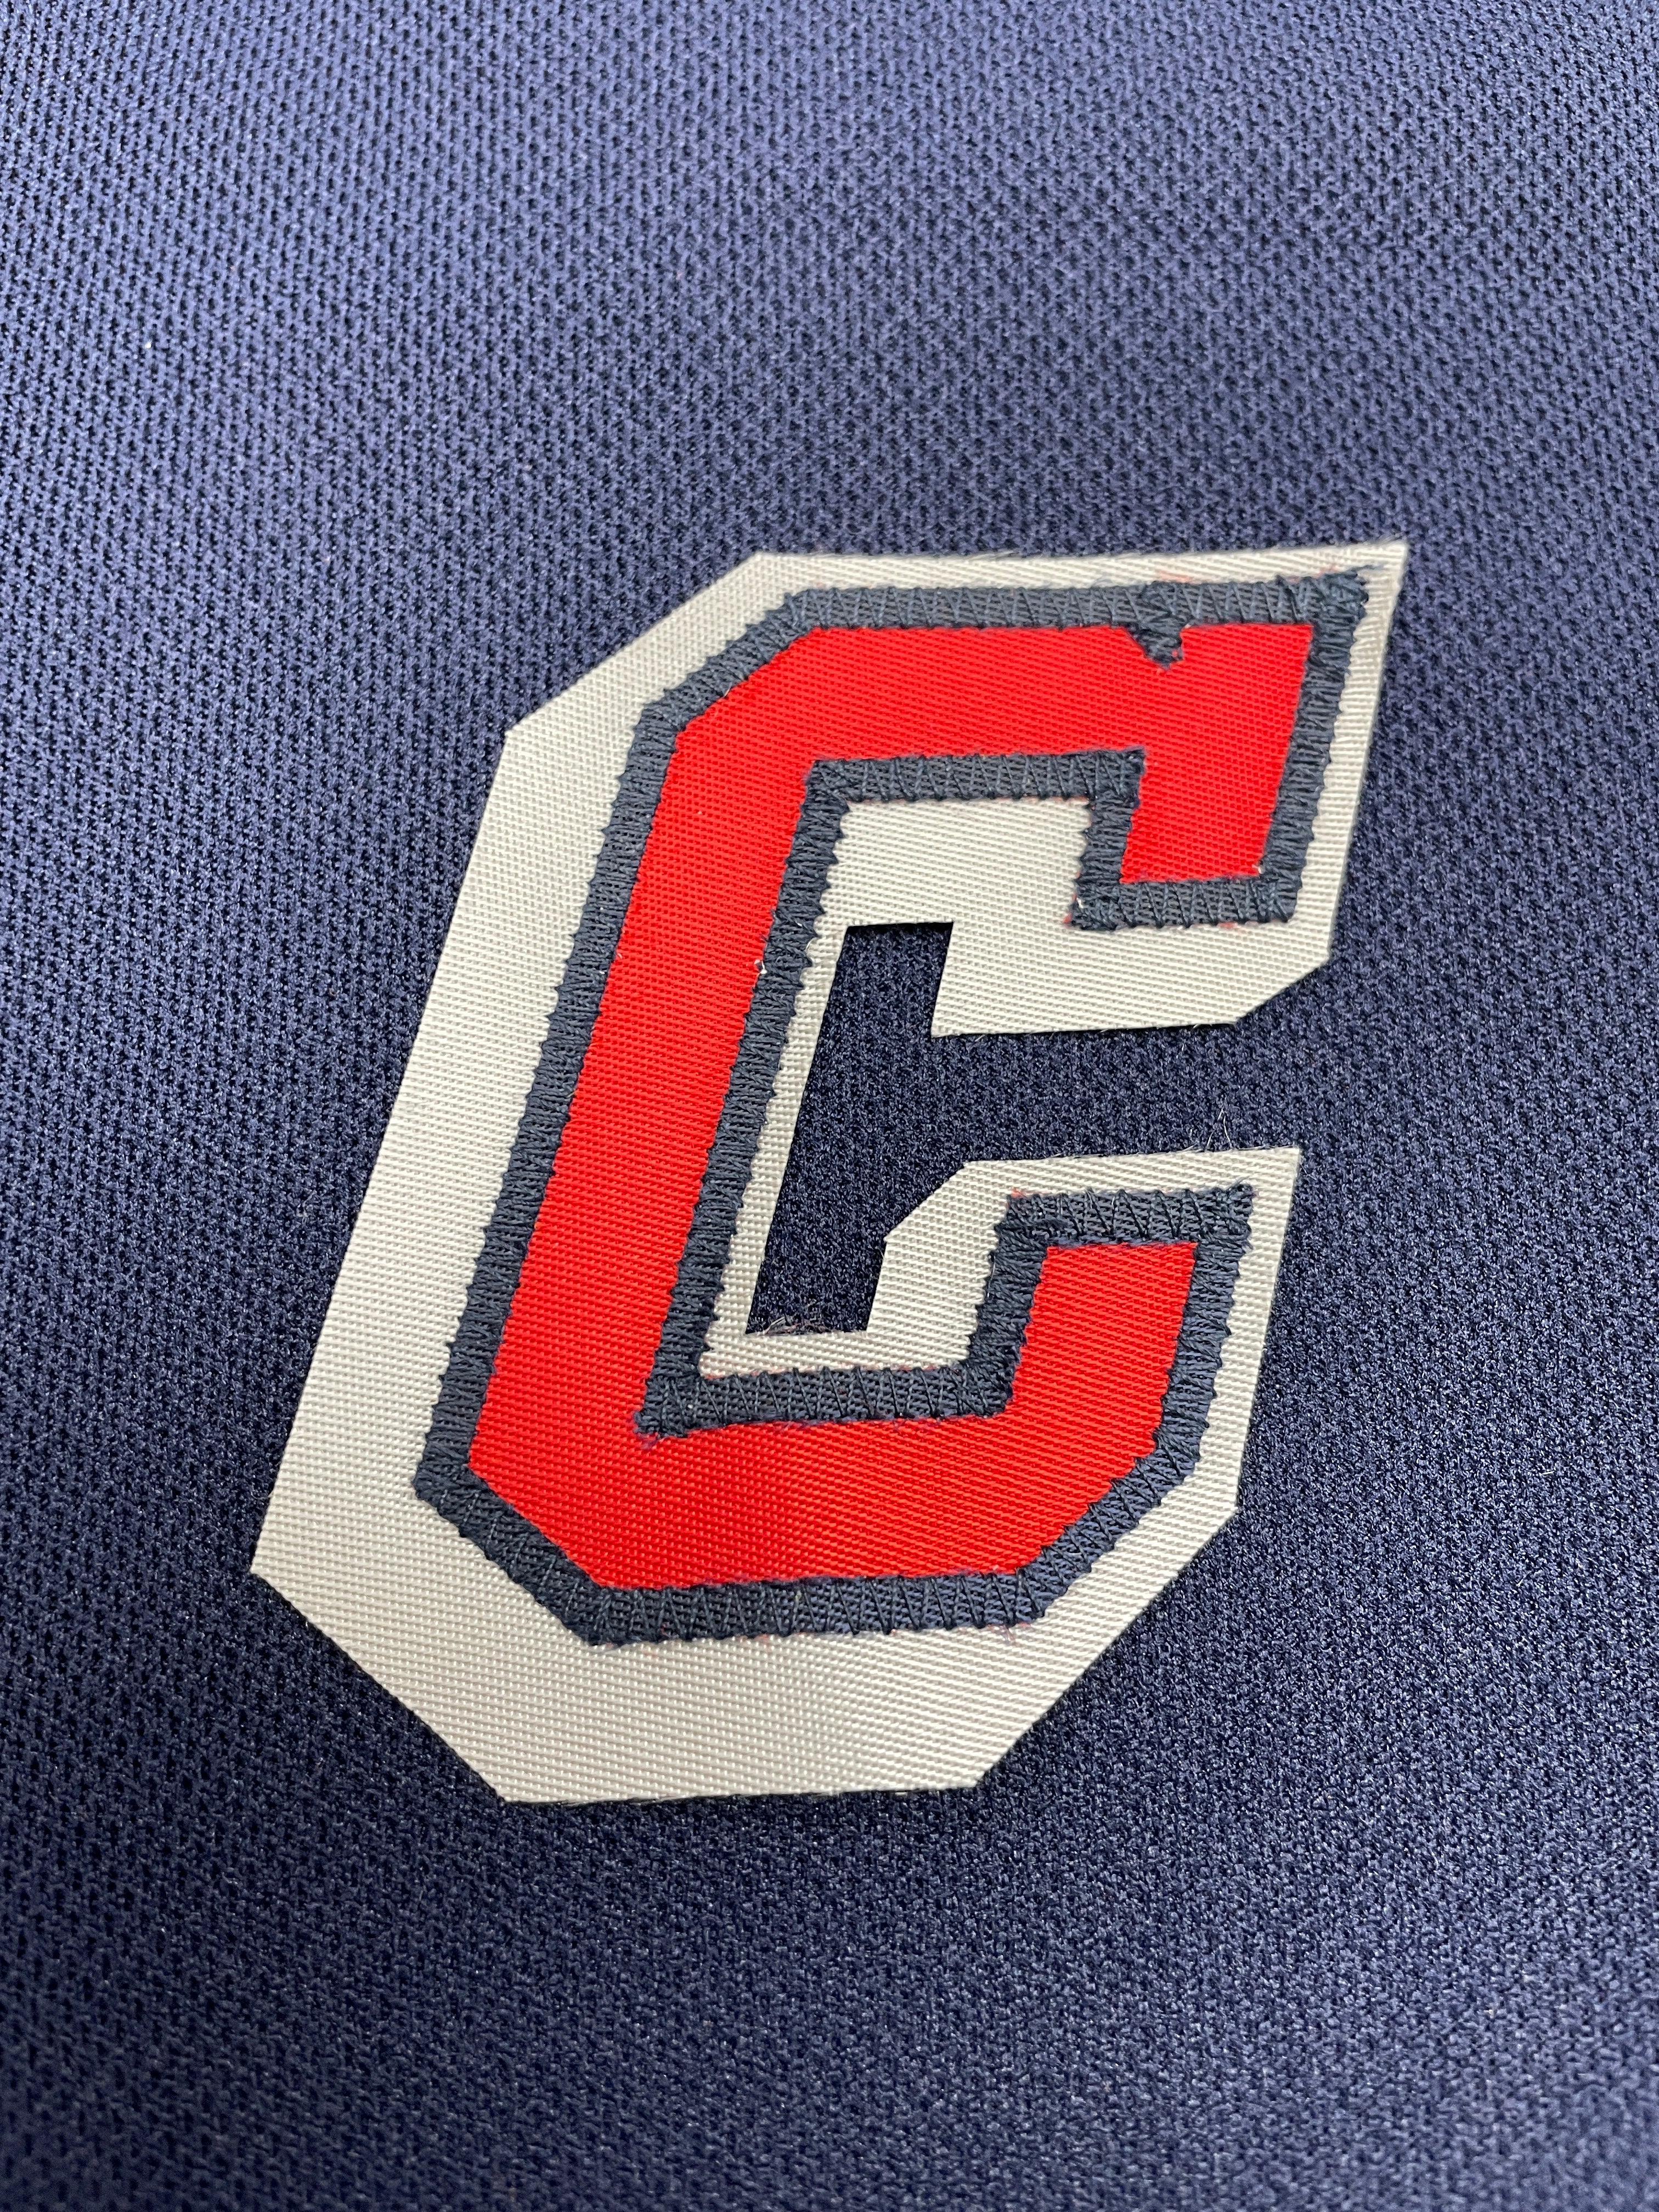 MLB's Rangers appoint CSM to land first jersey patch sponsor